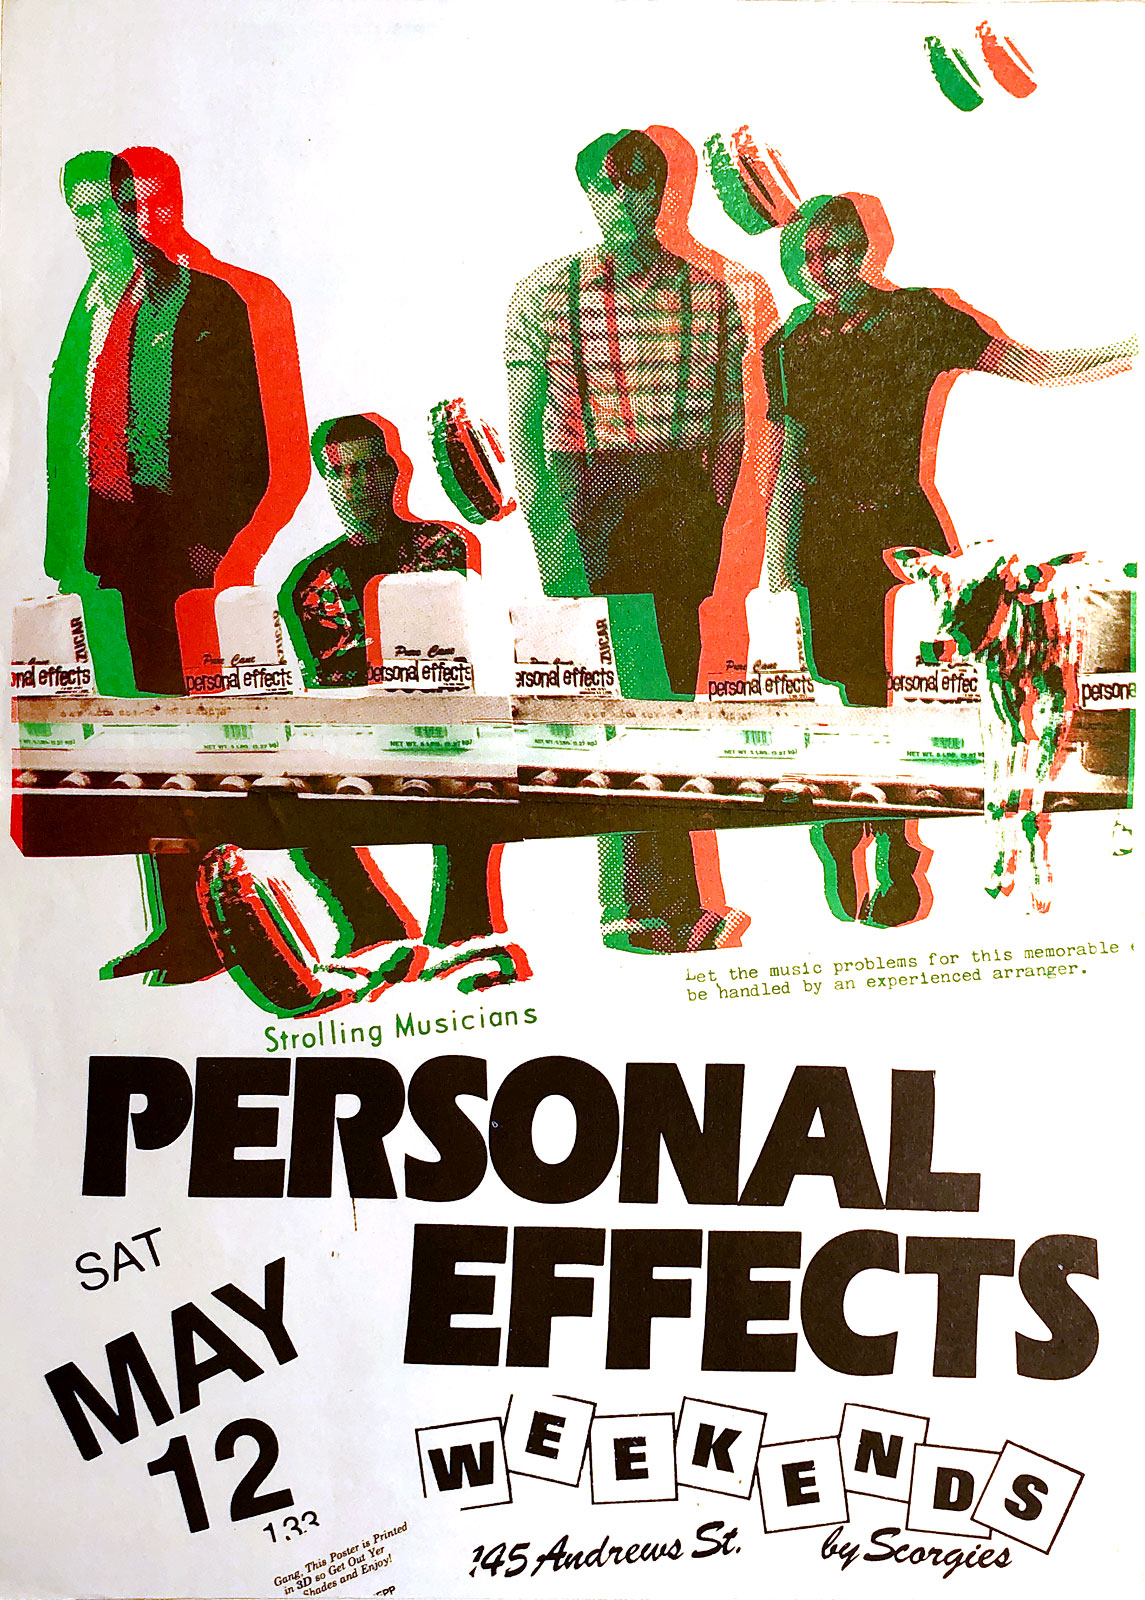 Poster for Personal Effects at Scorgie's in Rochester, New York on 05.12.1984. Chris Schepp designed this 3D poster and printed it at Midtown Printing.